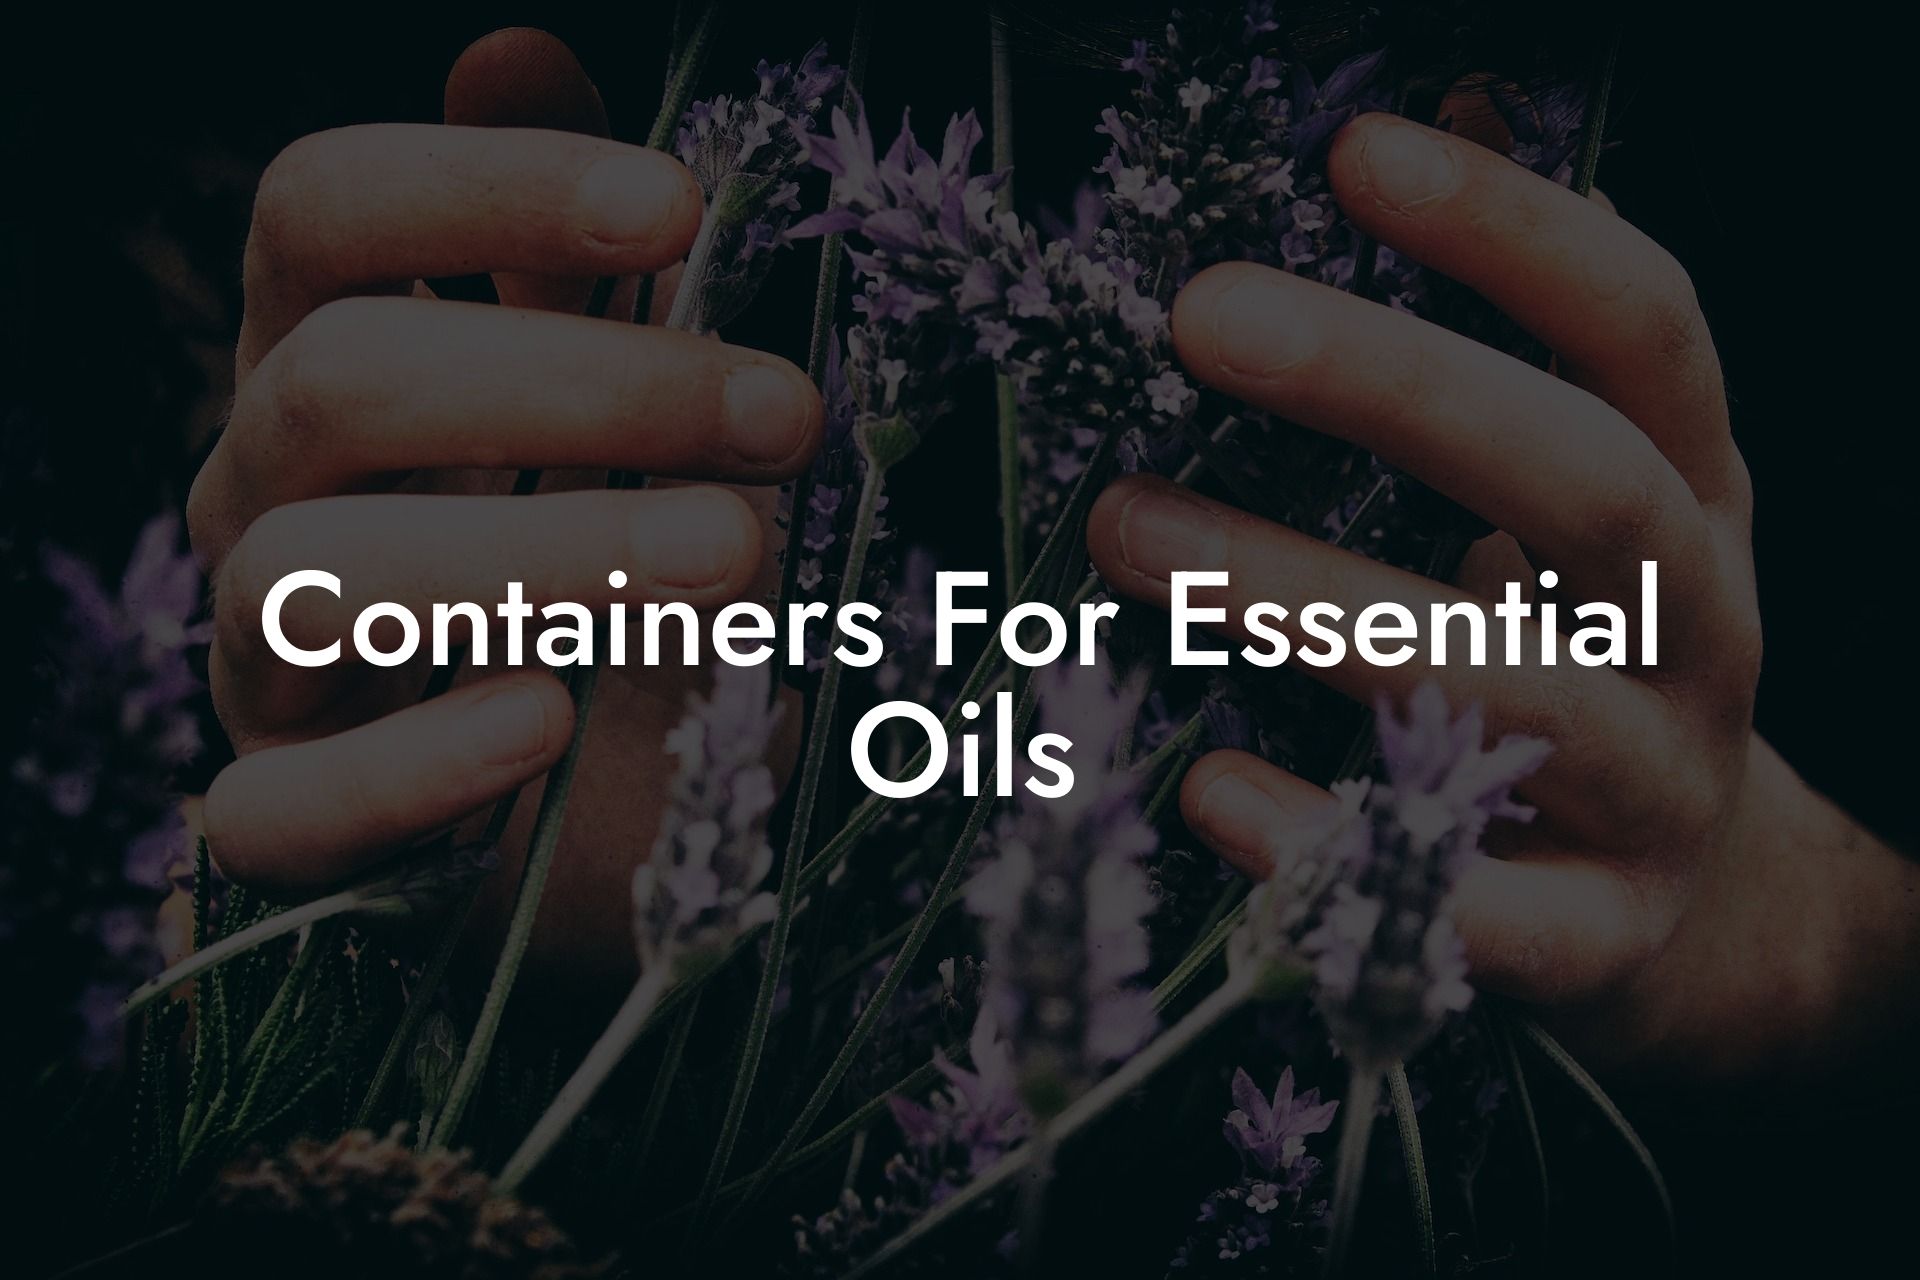 Containers For Essential Oils